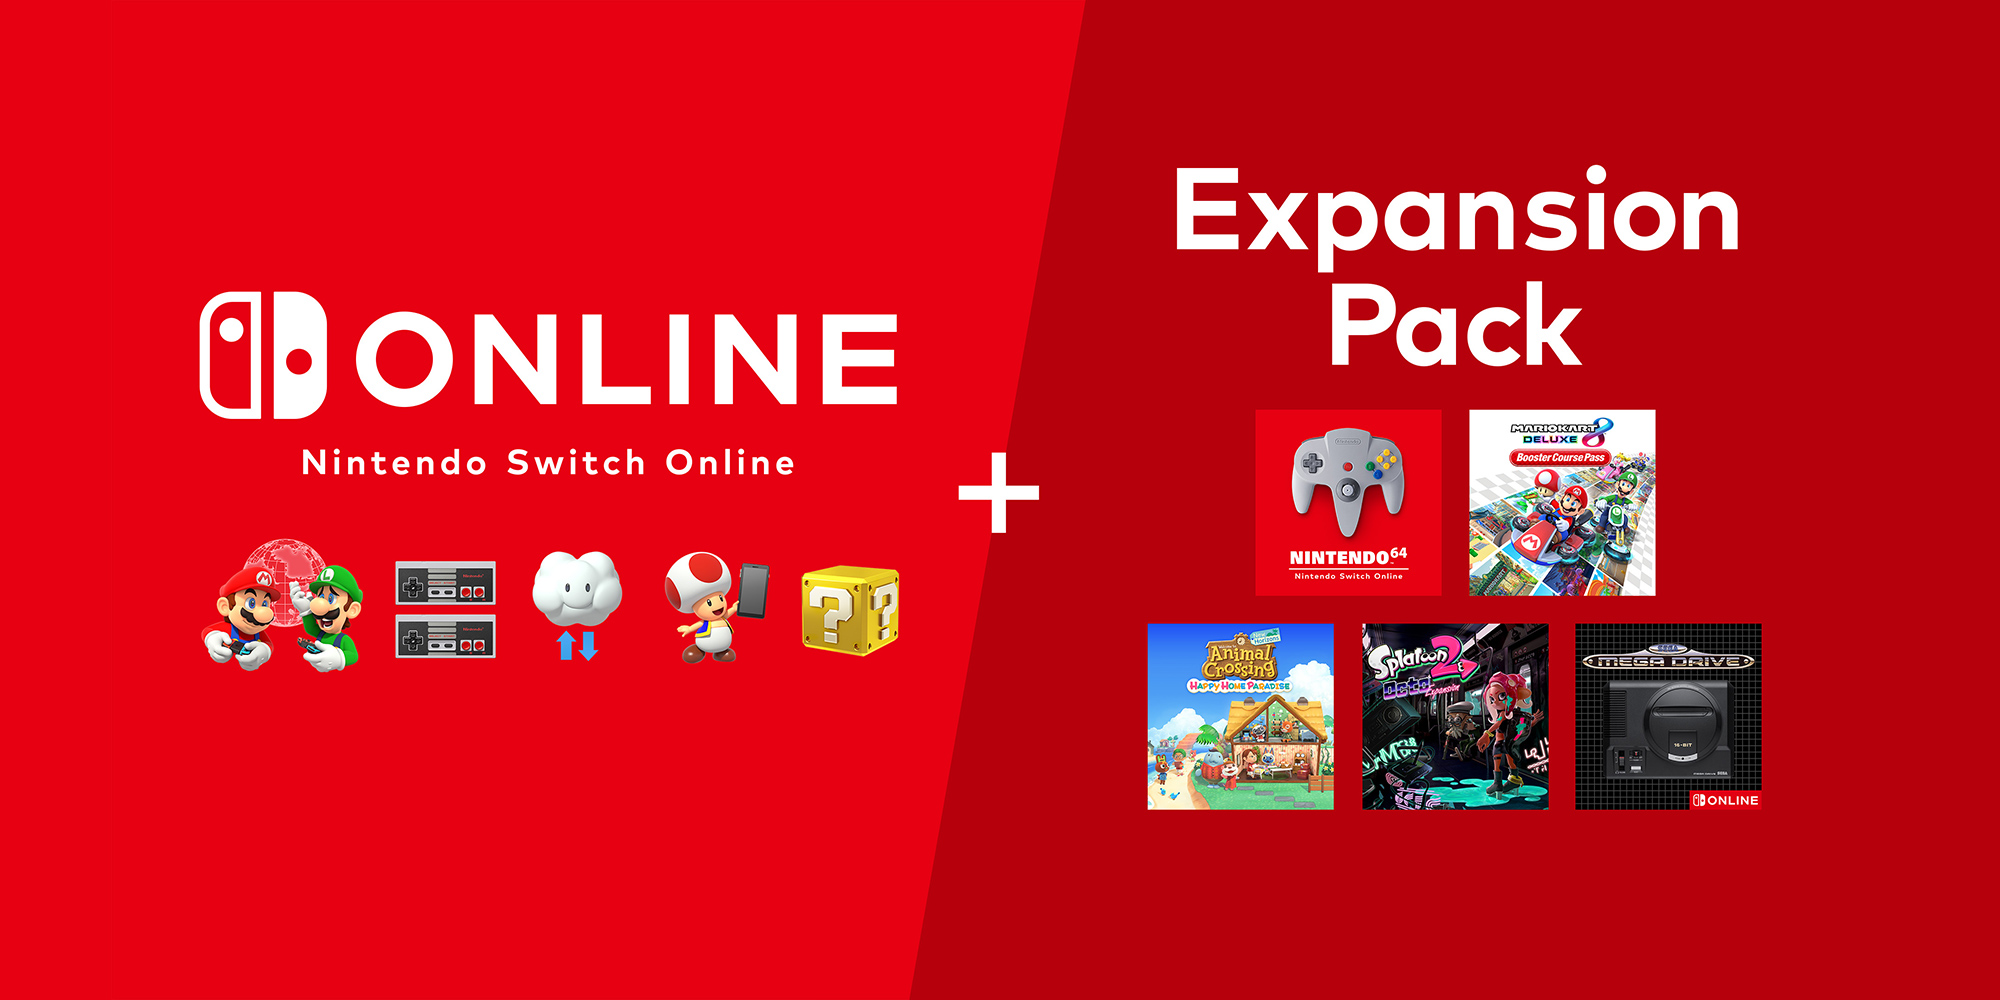 Nintendo Online Subscription and Expansion Pack